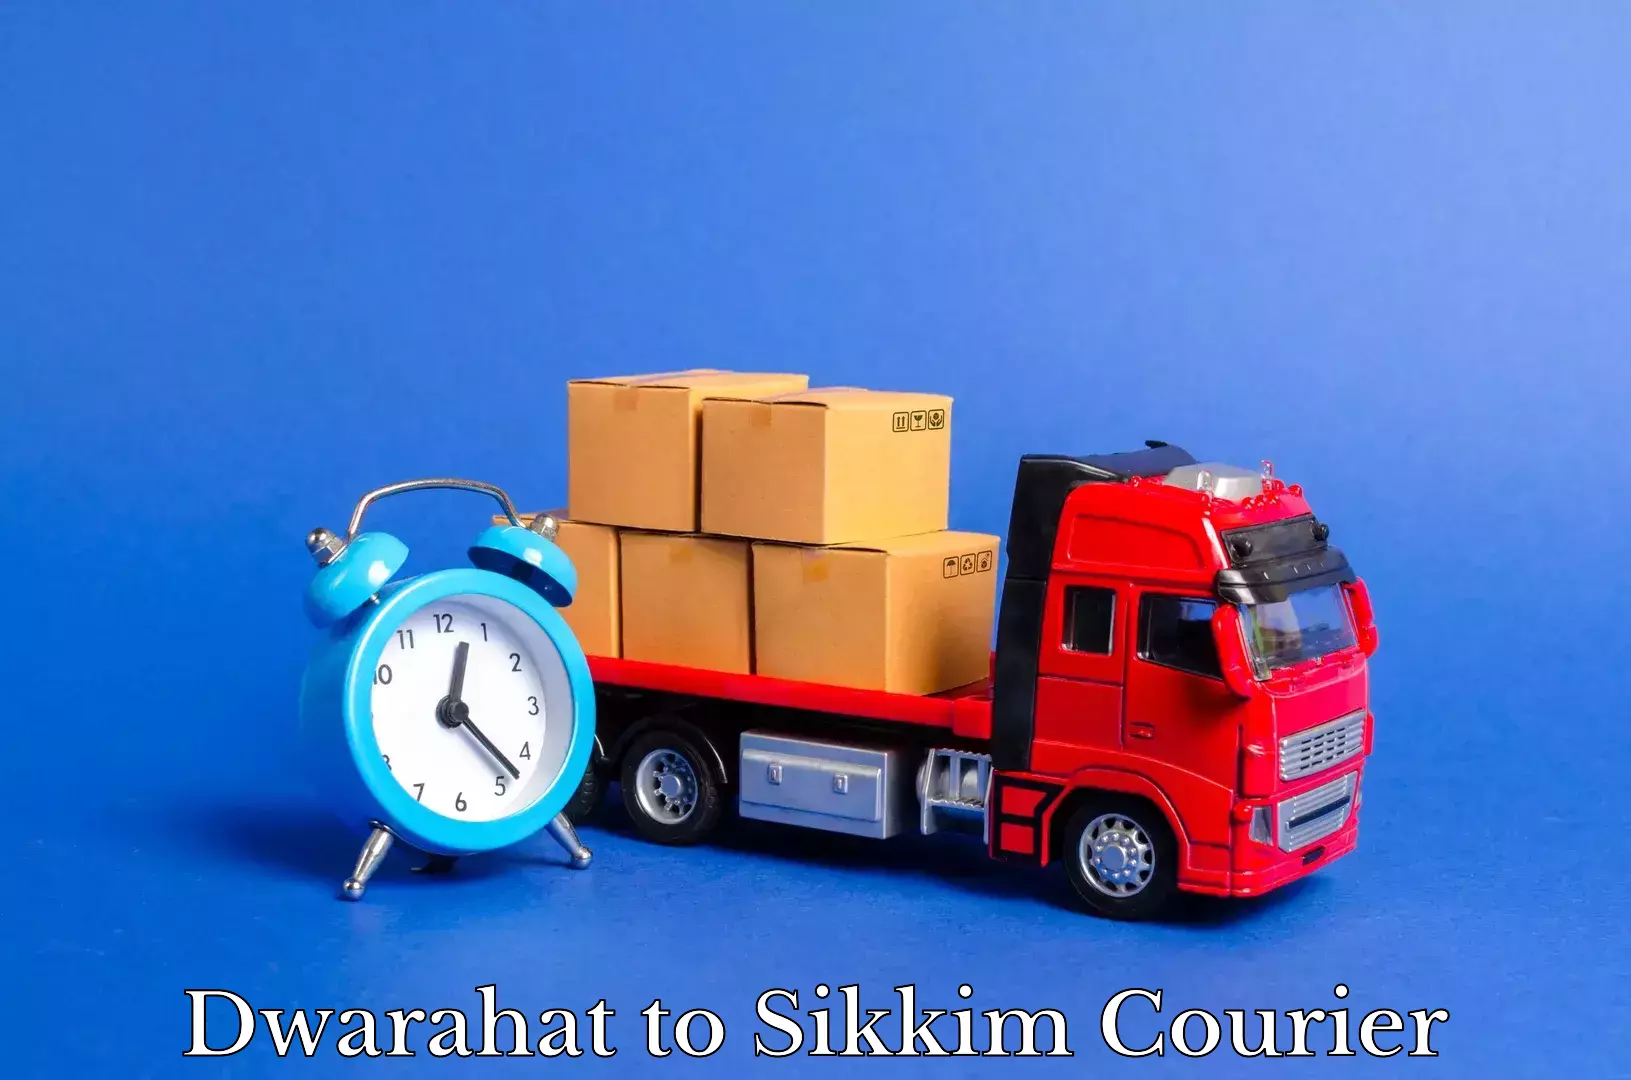 Professional relocation services in Dwarahat to Rangpo